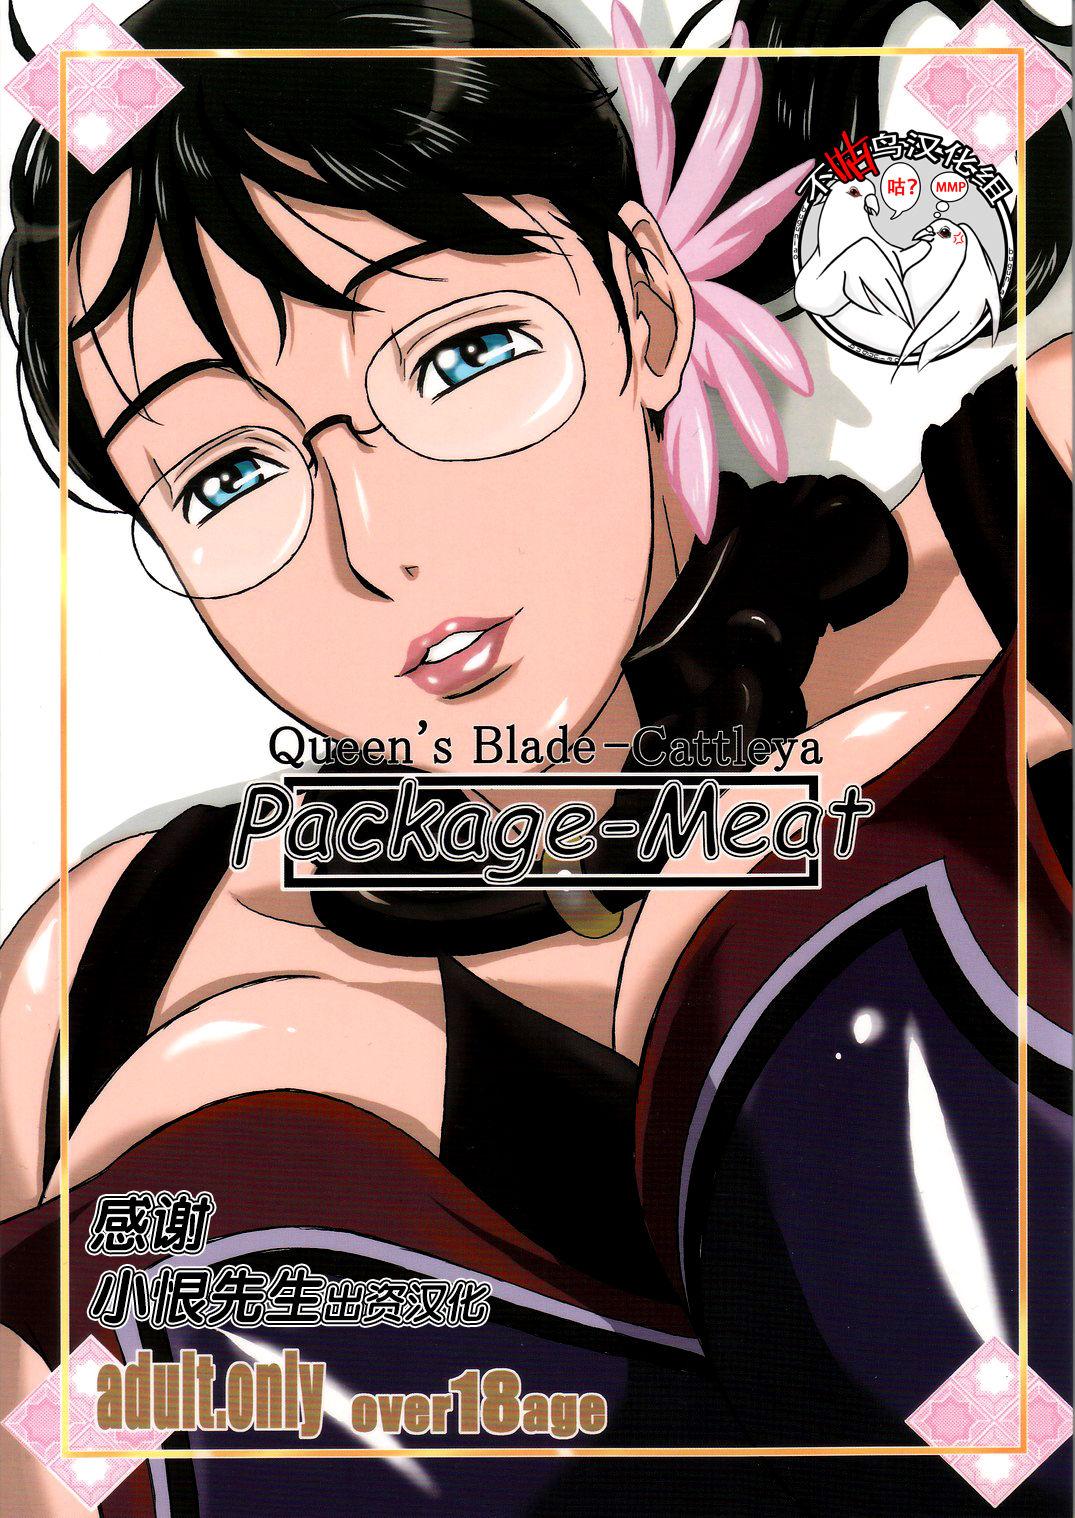 Nurugel (C72) [Shiawase Pullin Dou (Ninroku)] Package Meat (Queen's Blade) [Chinese] amateur coloring version - Queens blade Alone - Page 1